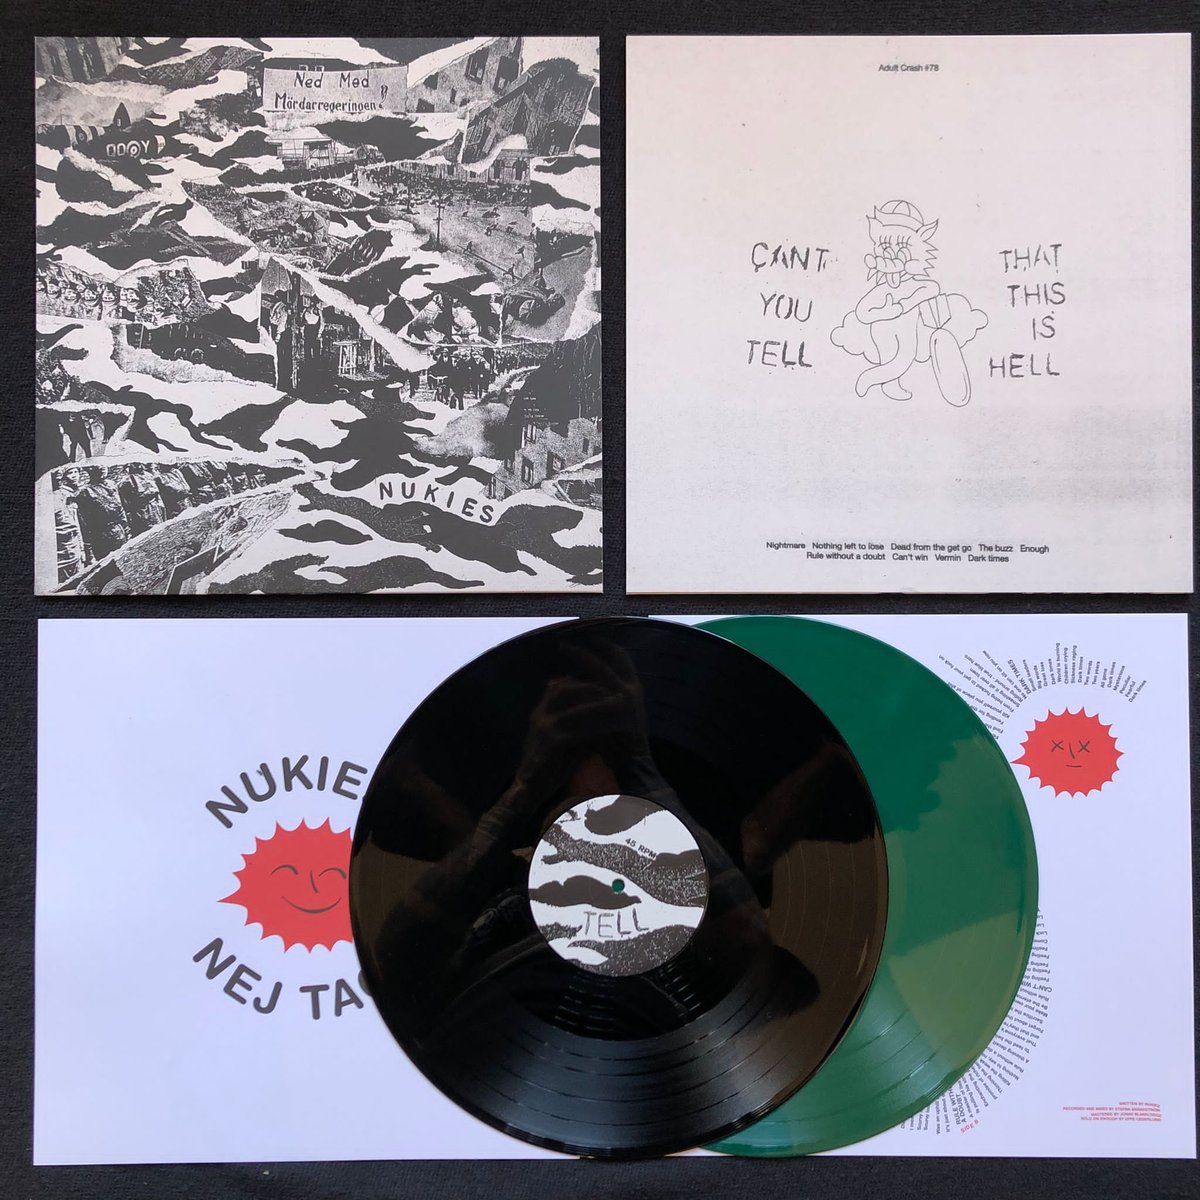 Image of NUKIES "Can't you tell that this is Hell" 12" - Green wax